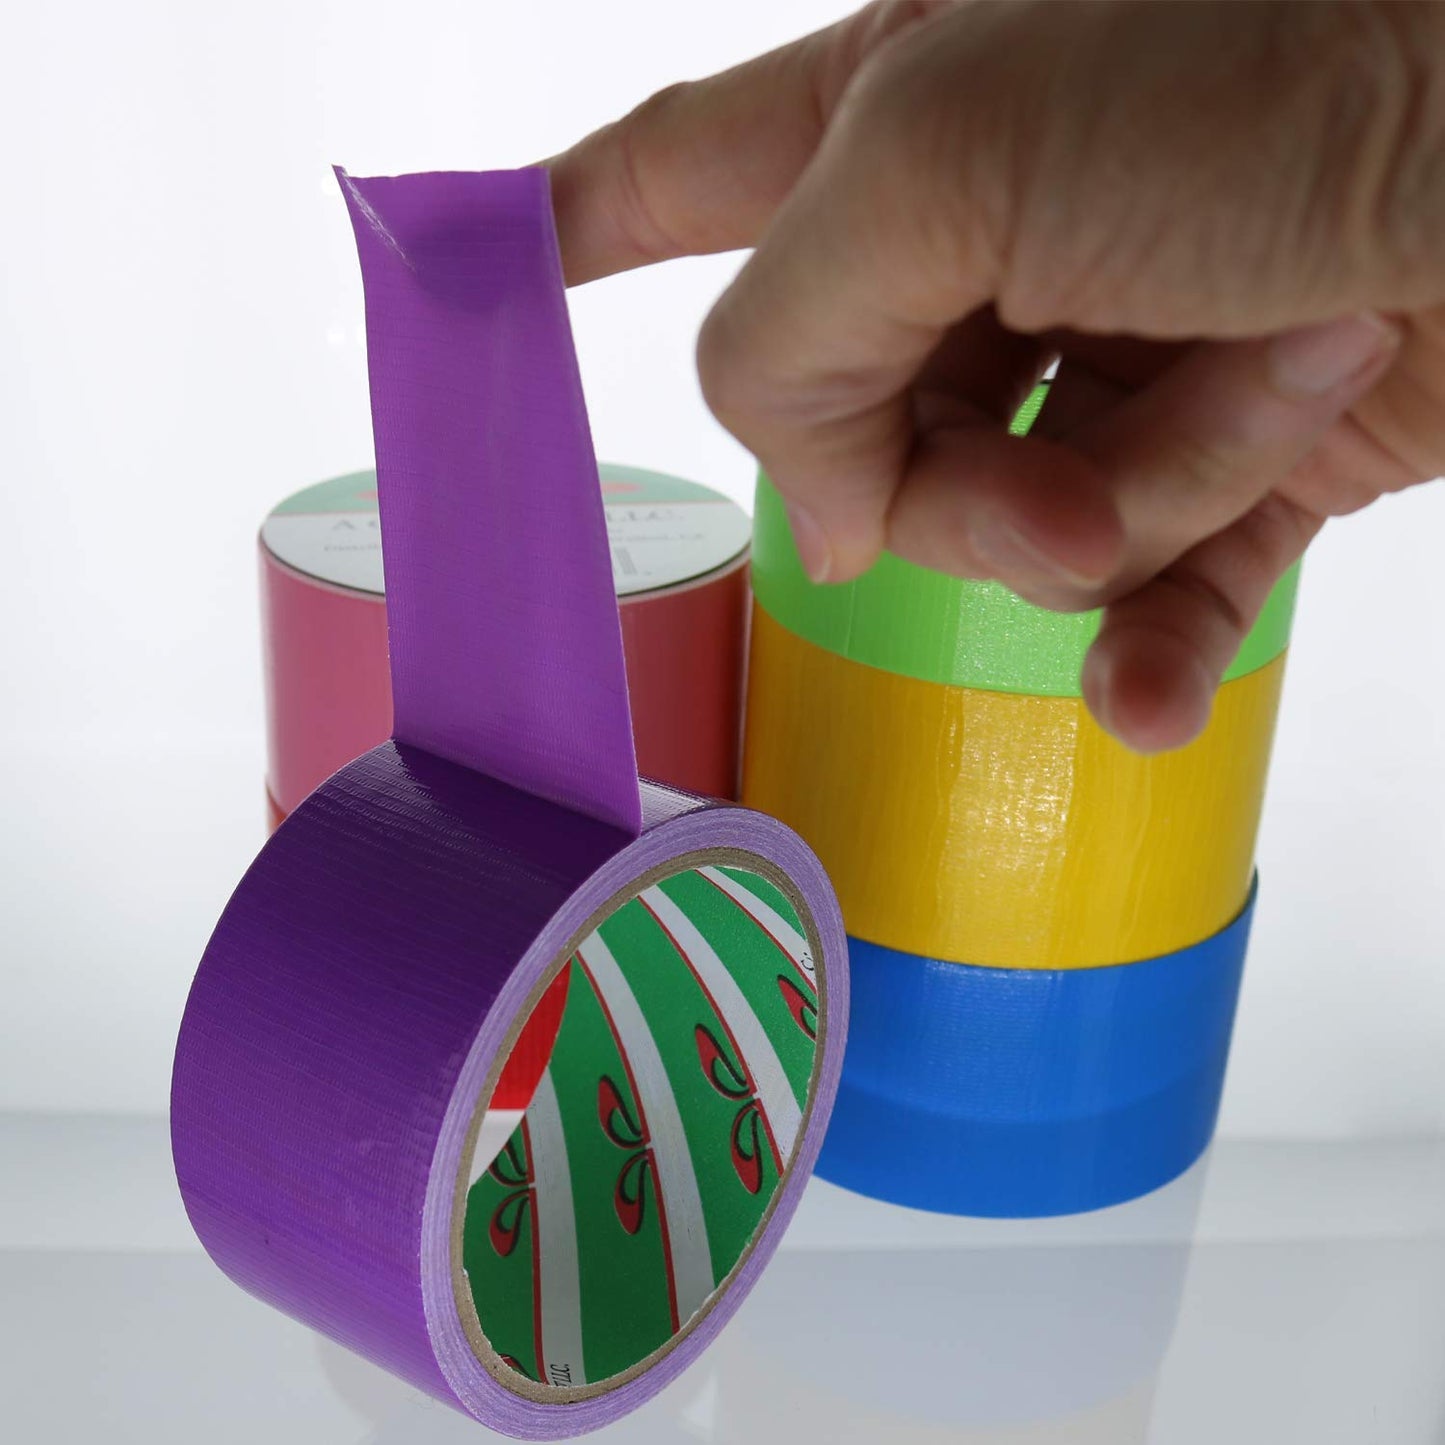 GIFTEXPRESS 6 Assorted Colored Duct Tapes